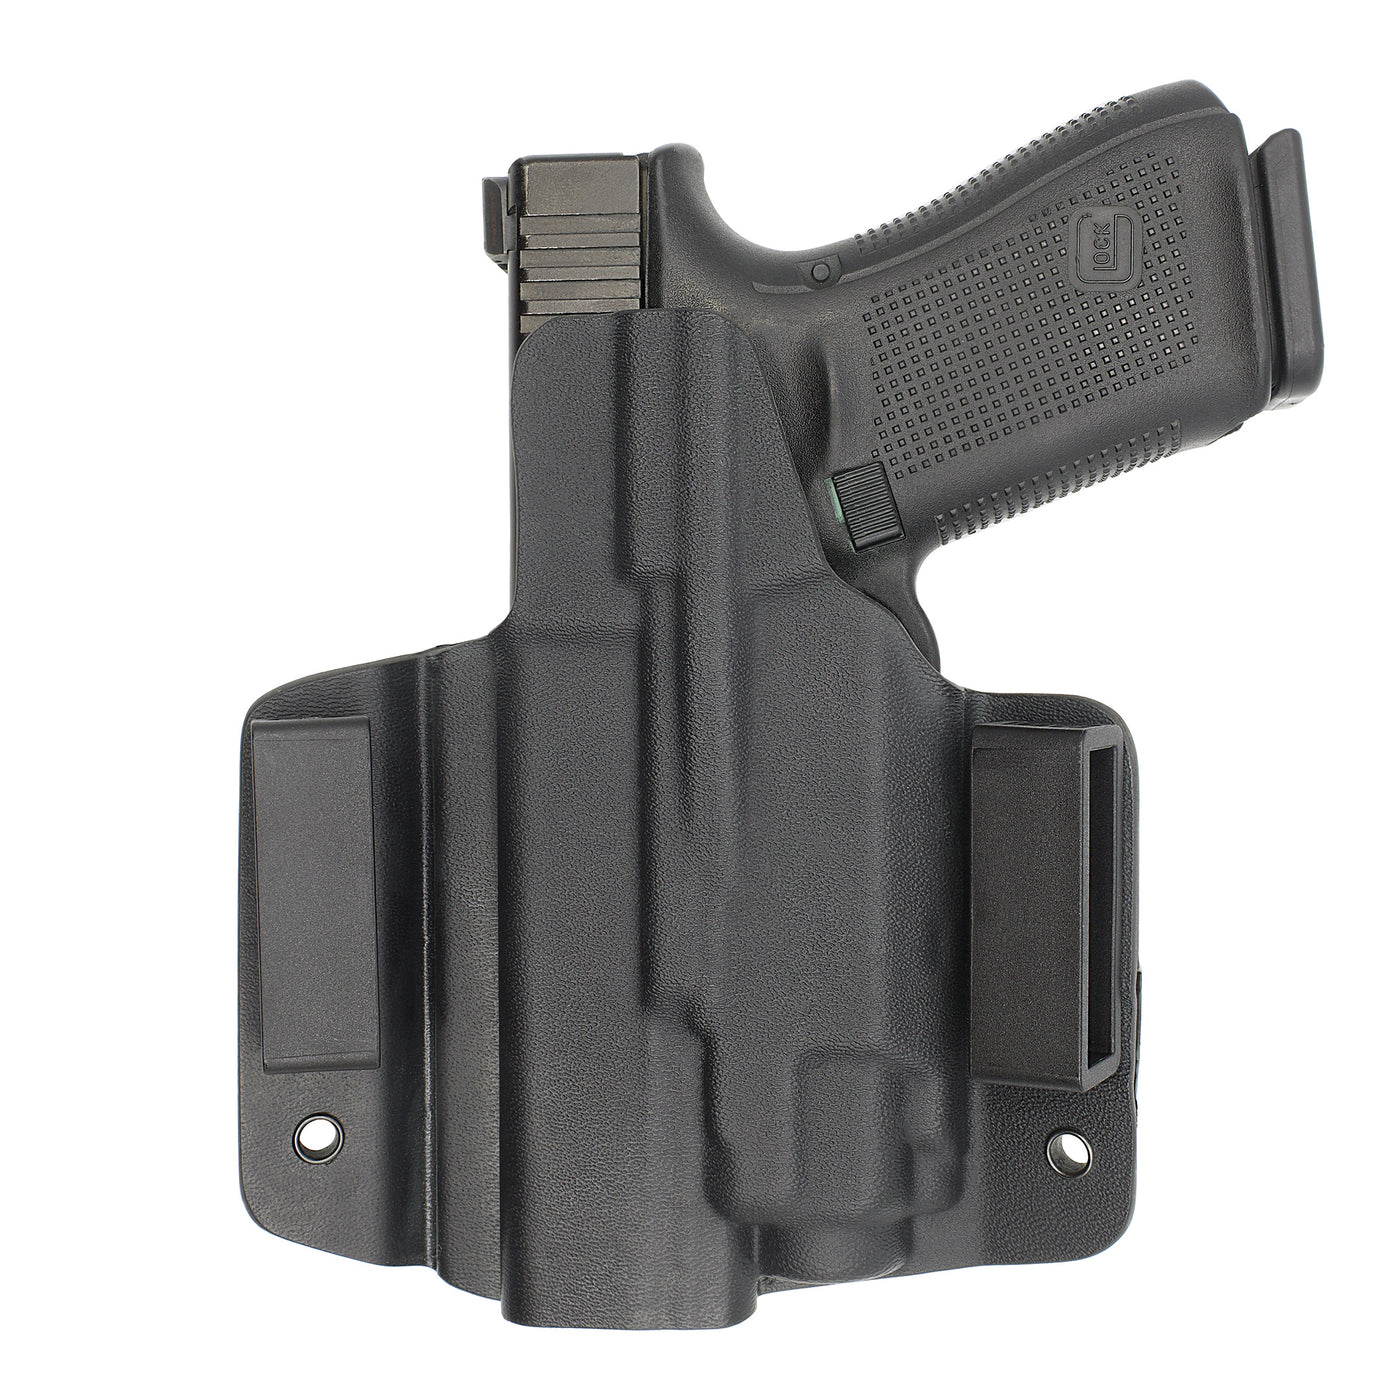 C&G Holsters quickship OWB tactical Poly80 streamlight TLR8 holstered back view